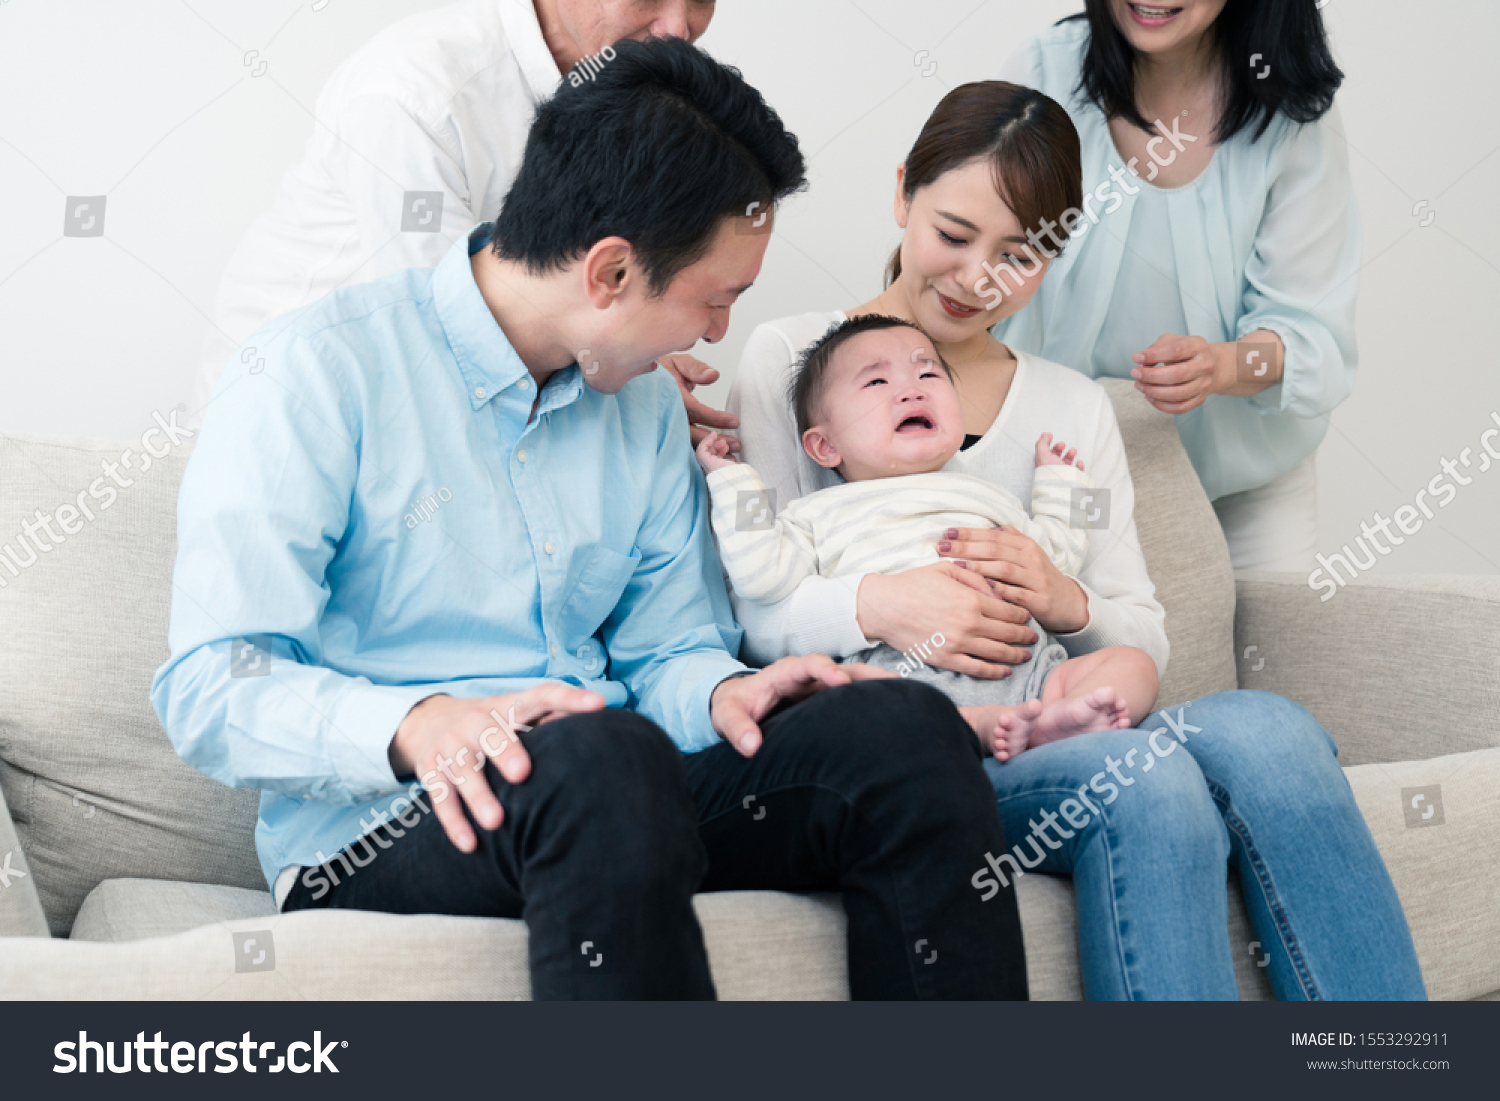 A baby and family image #1553292911